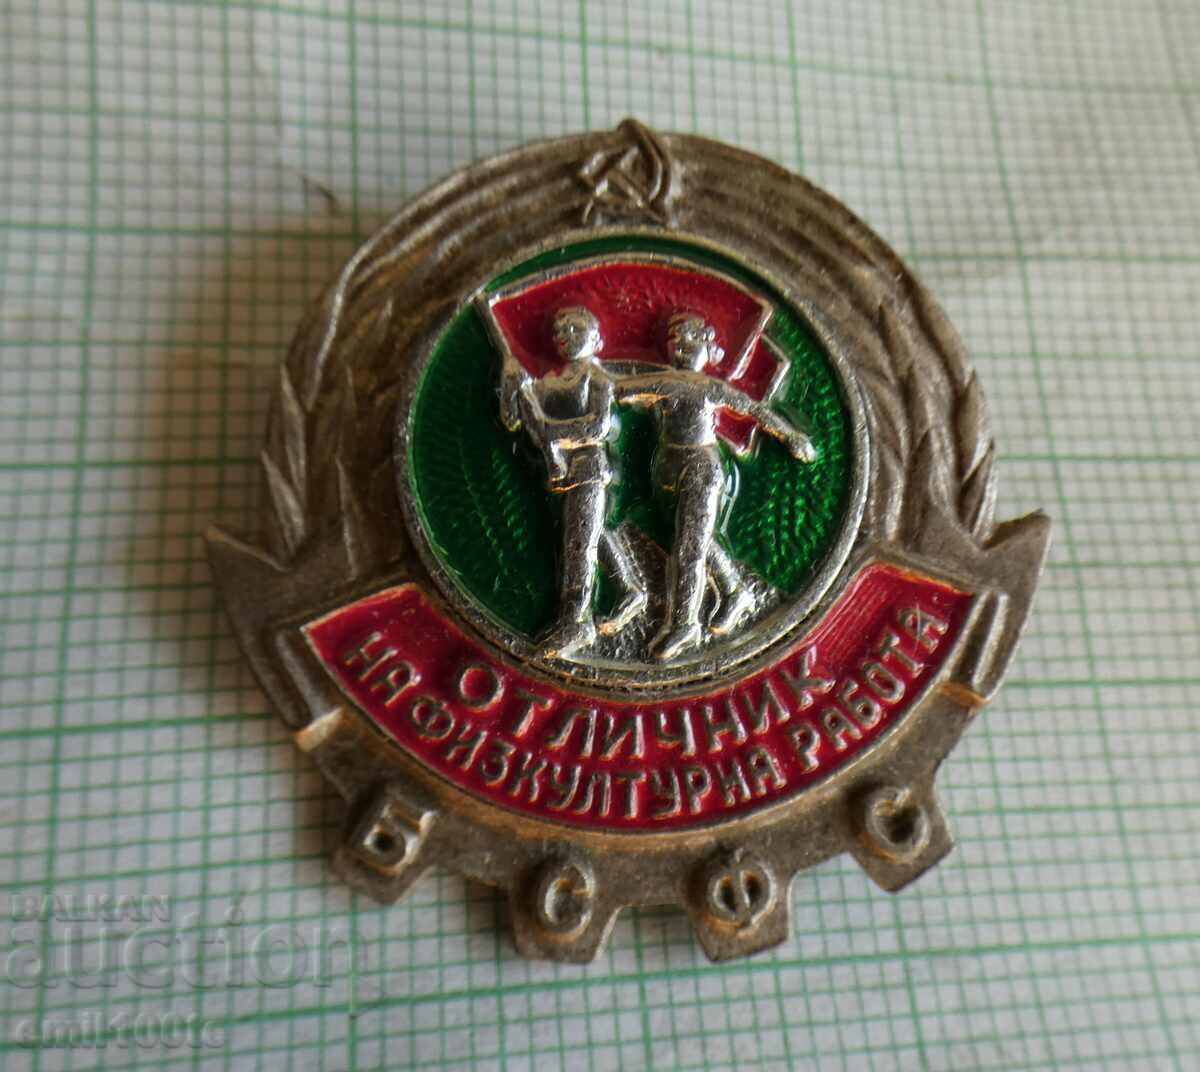 Badge - Excellent in physical education